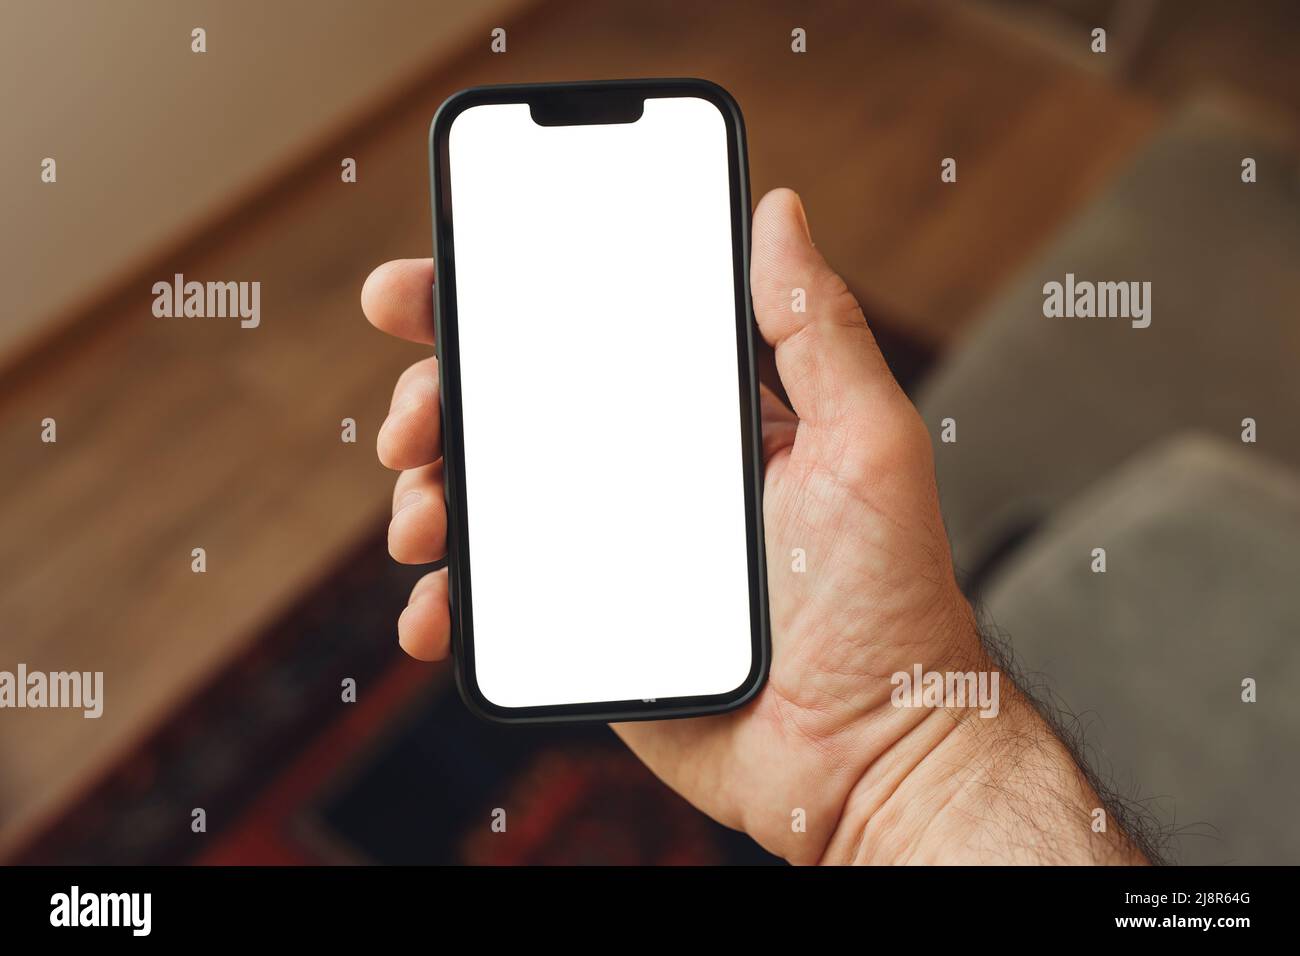 Smartphone mockup, internet of things and smart home concept, man using mobile phone. Close up of hand holding device with blank screen in home interi Stock Photo